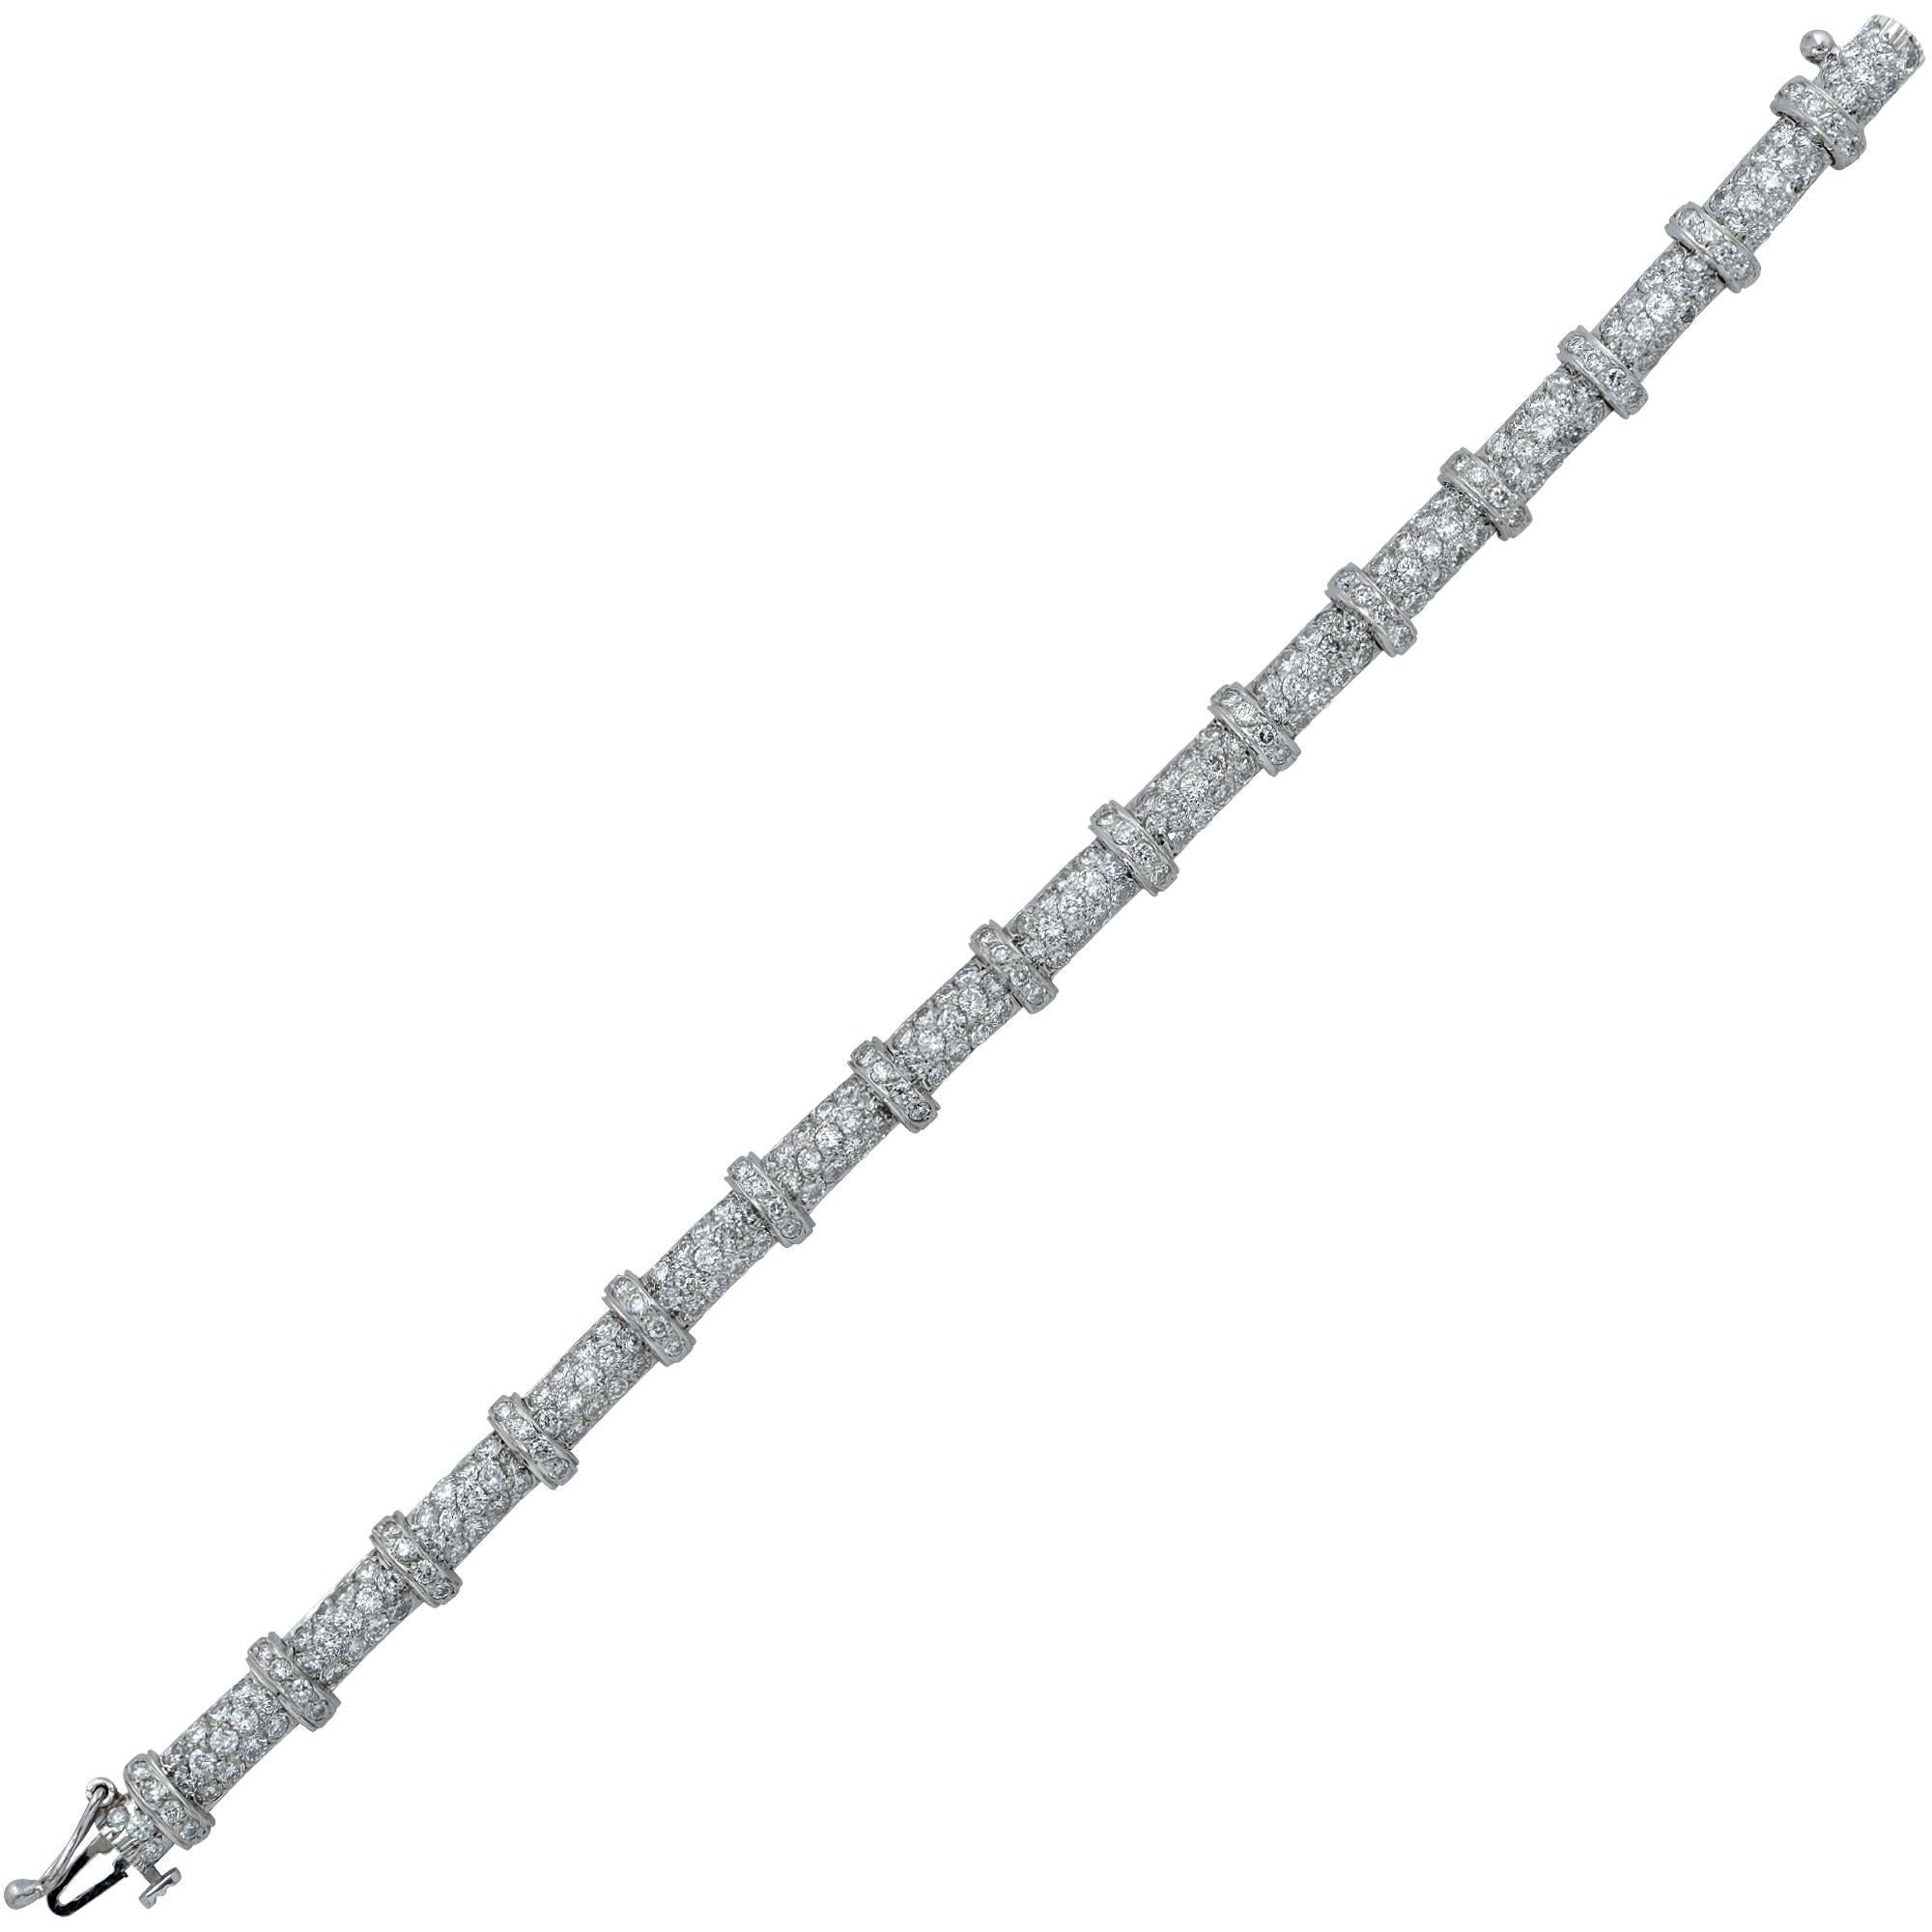 Ladies platinum bracelet containing 254 round brilliant cut diamonds weighing approximately 10.75cts G-H color and VS clarity.

This bracelet measures 7.25 inches in length and .30 of an inch at its widest point.
It is stamped and/or tested as